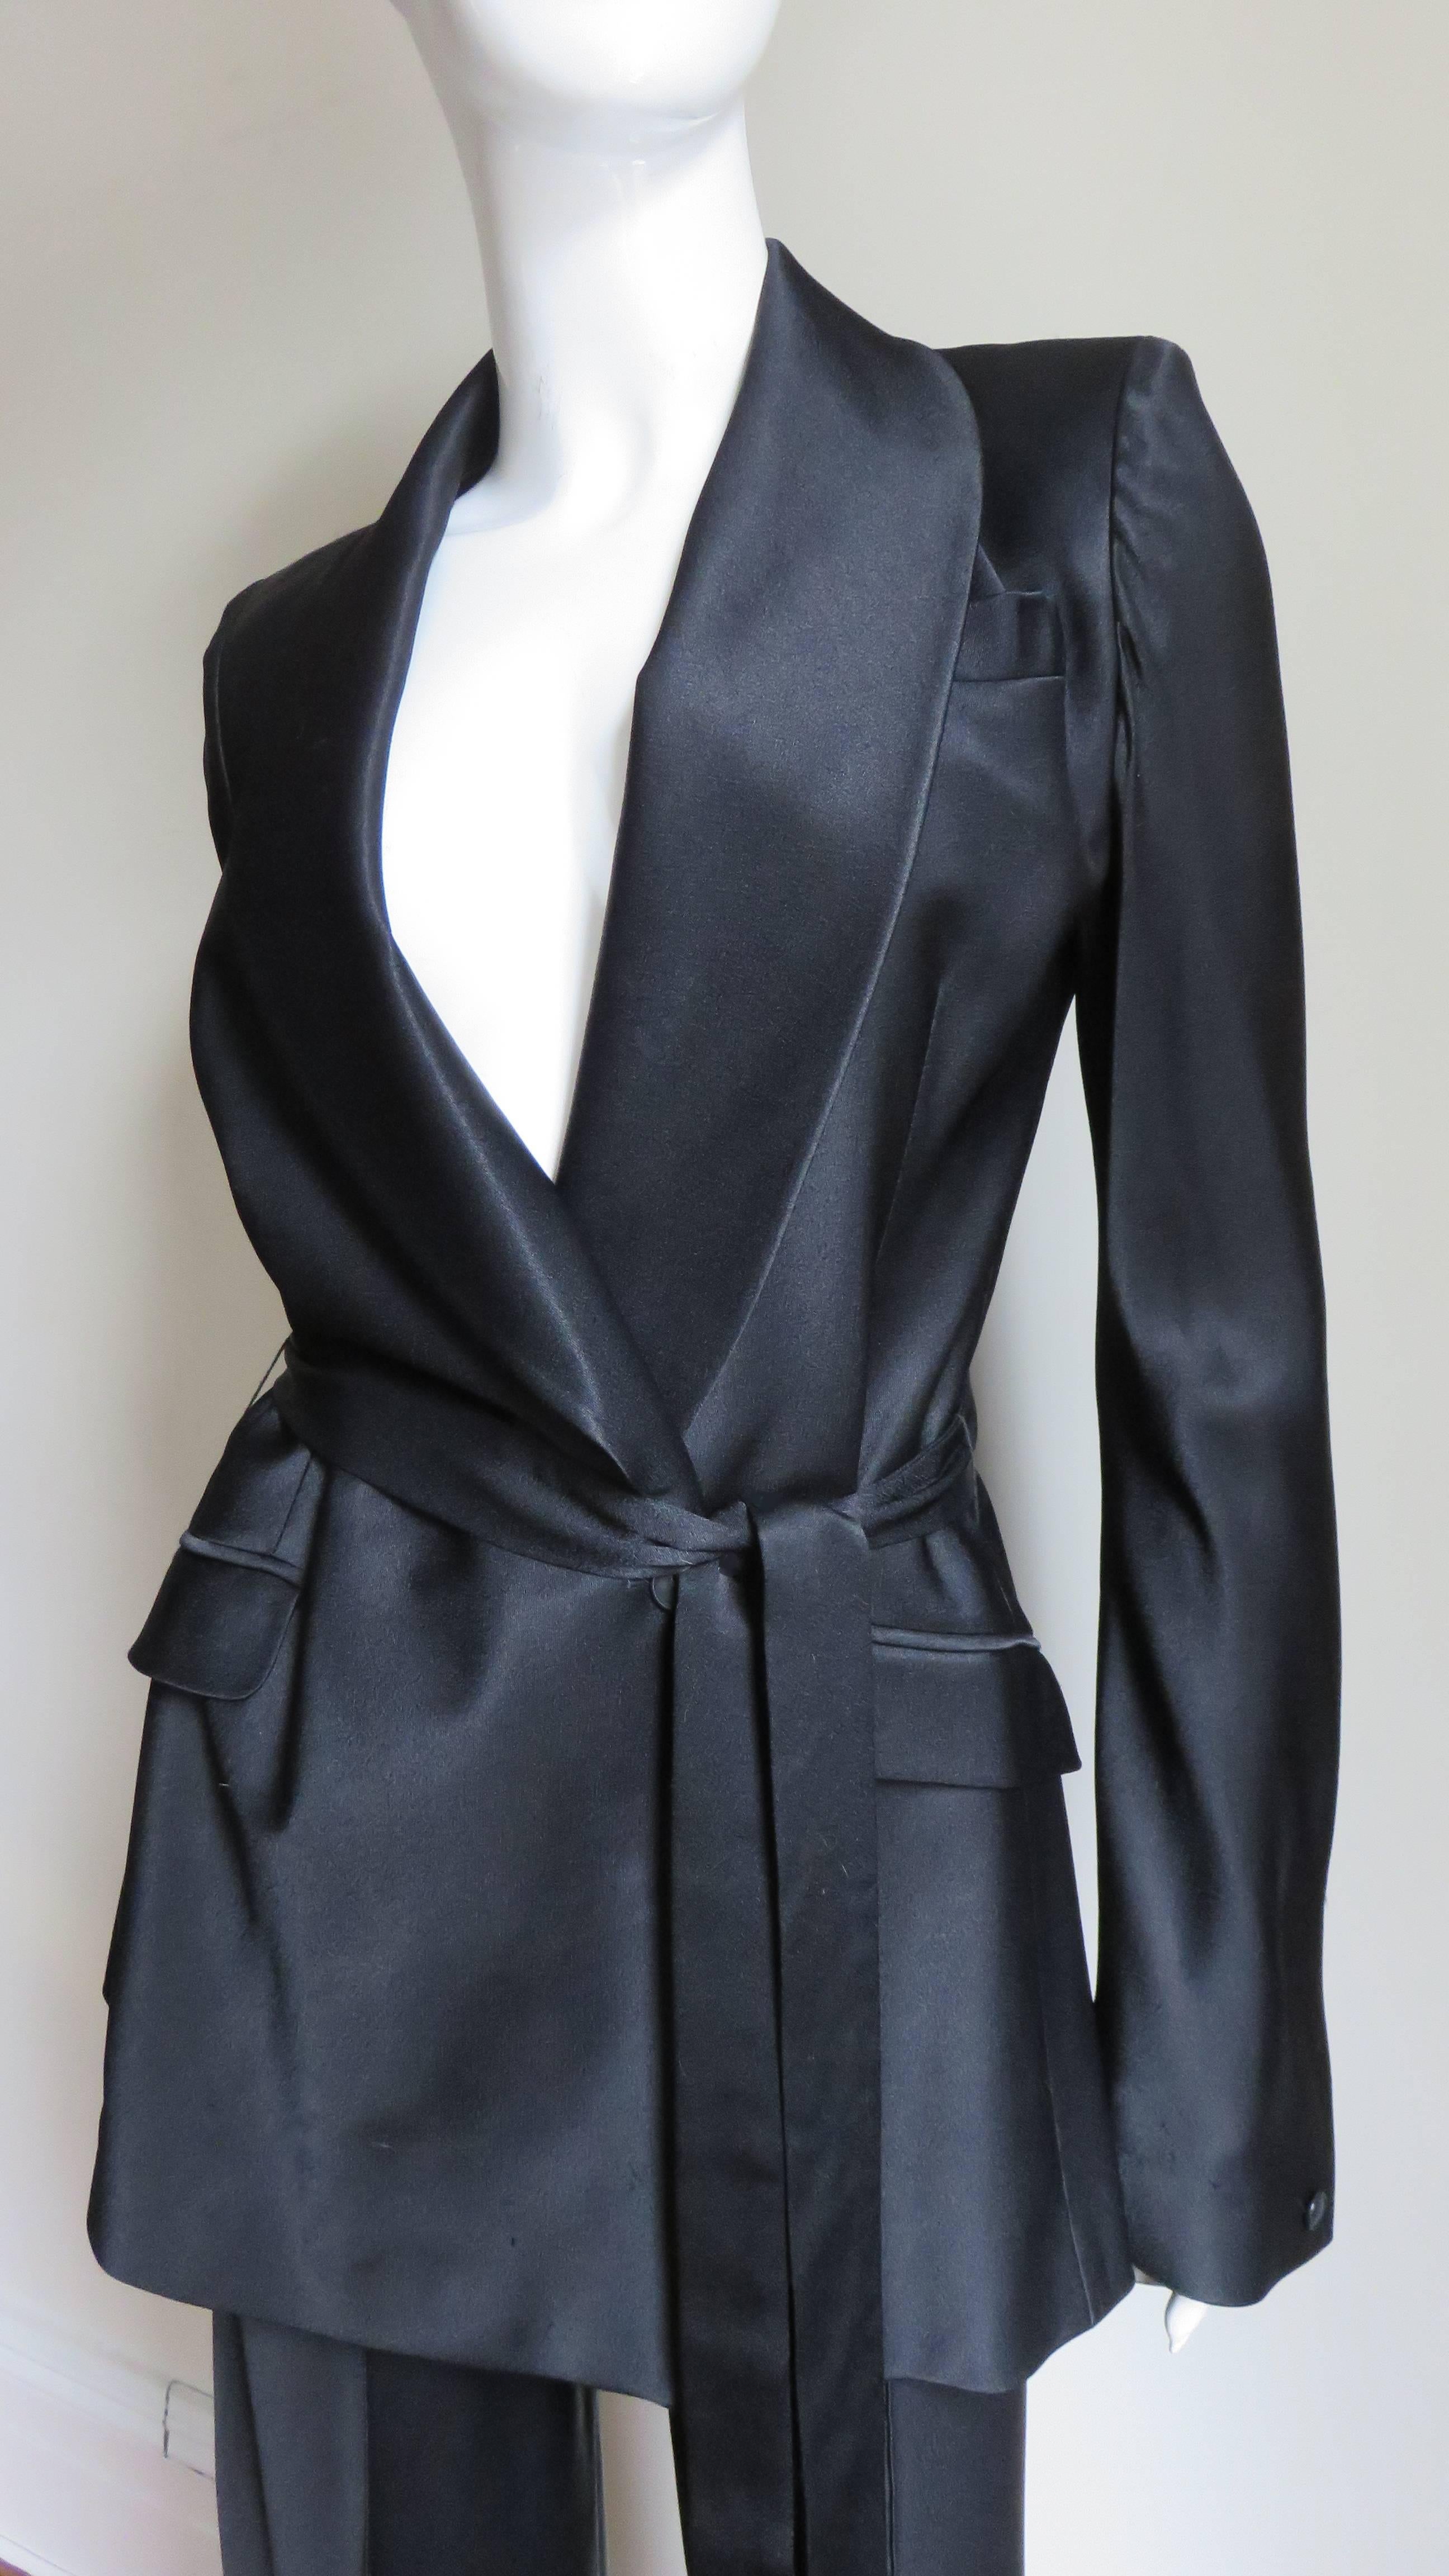 So fabulous...a black silk wrap jacket and full leg pants from John Galliano.  The jacket has a shawl collar, slanted hip flap pockets and long bell sleeves. It wraps and closes with an inner and outer button at the waist, comes with a matching tie